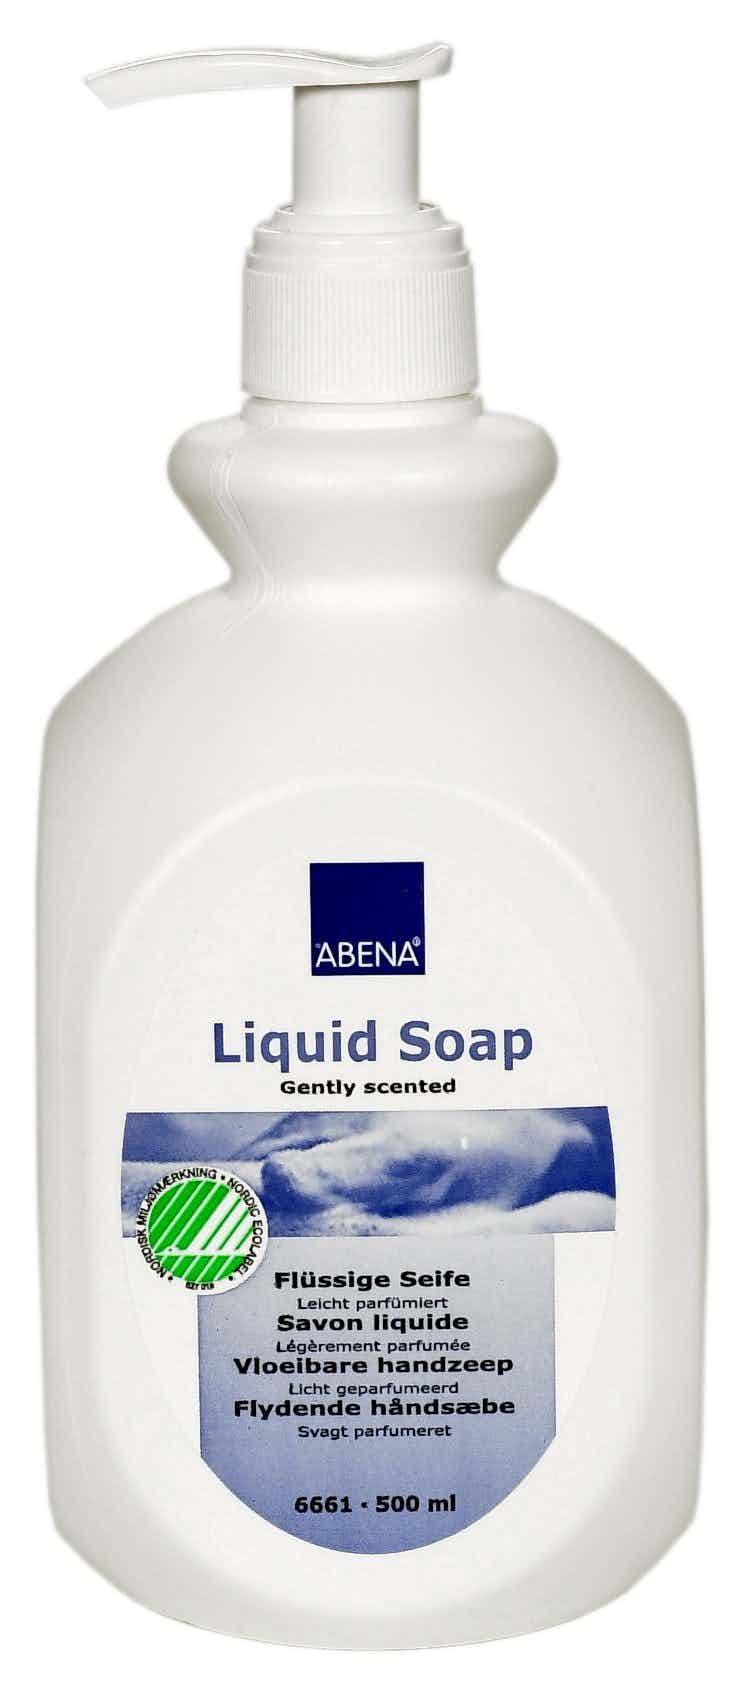 Abena Liquid Soap, Gently Scented, 500 mL, 6661, Case of 12